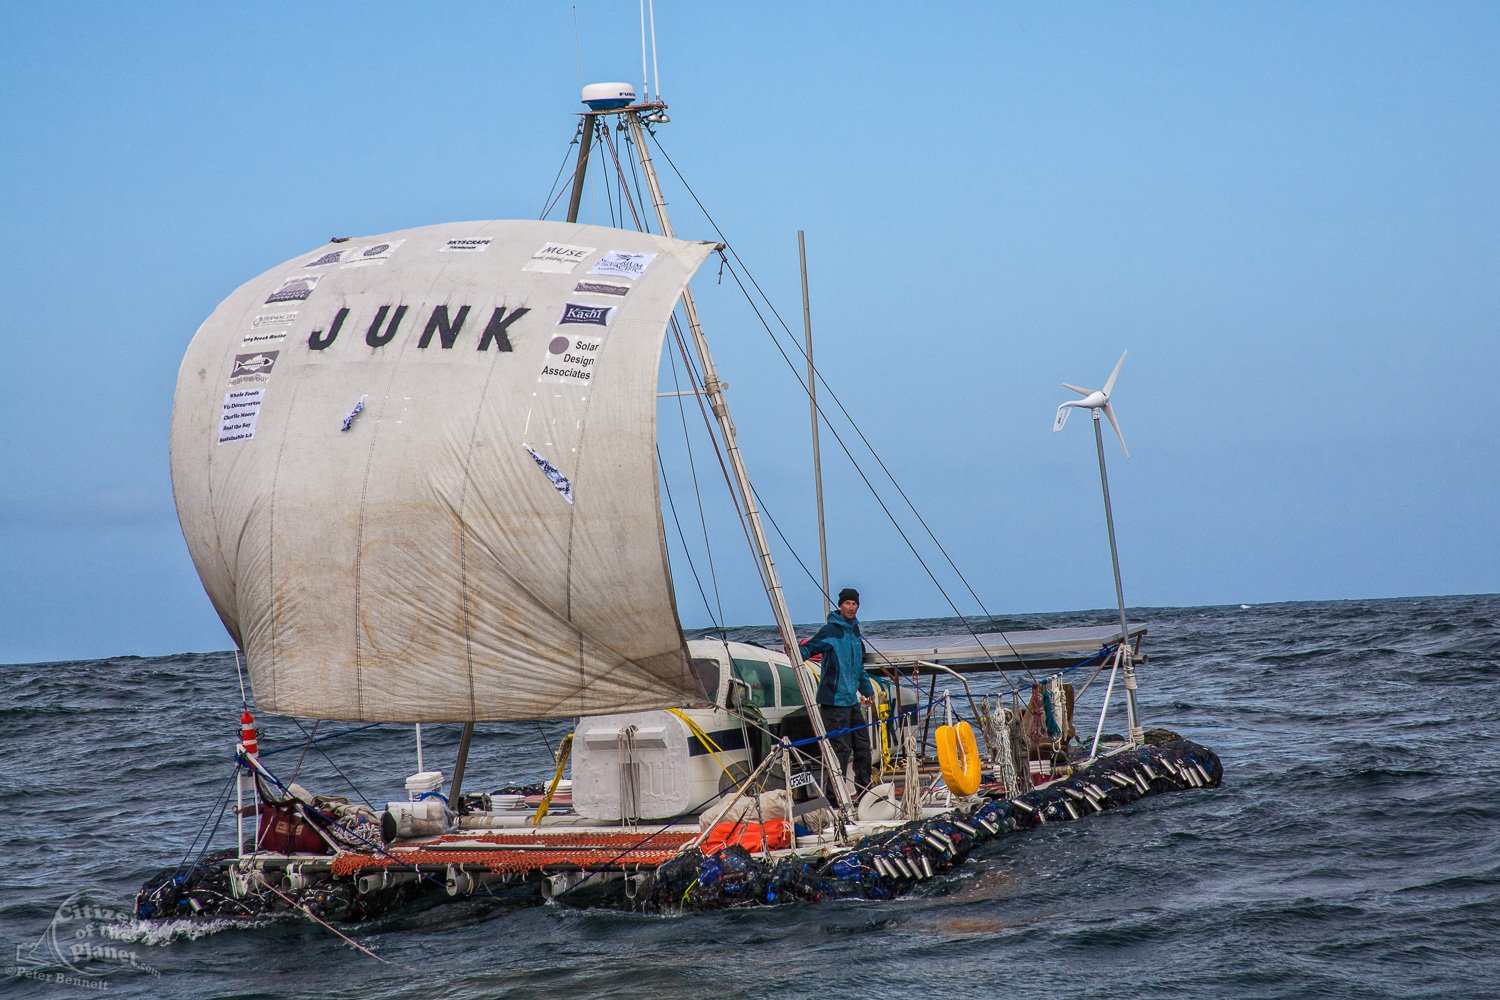  On the third day of the trip the “Junk” sets sail about 65 miles from shore. On Sunday June 1, the raft named "Junk"  left Long Beach for it’s 2100 mile voyage to Hawaii to bring attention to the plastic marine debris (nicknamed the plastic soup) ac